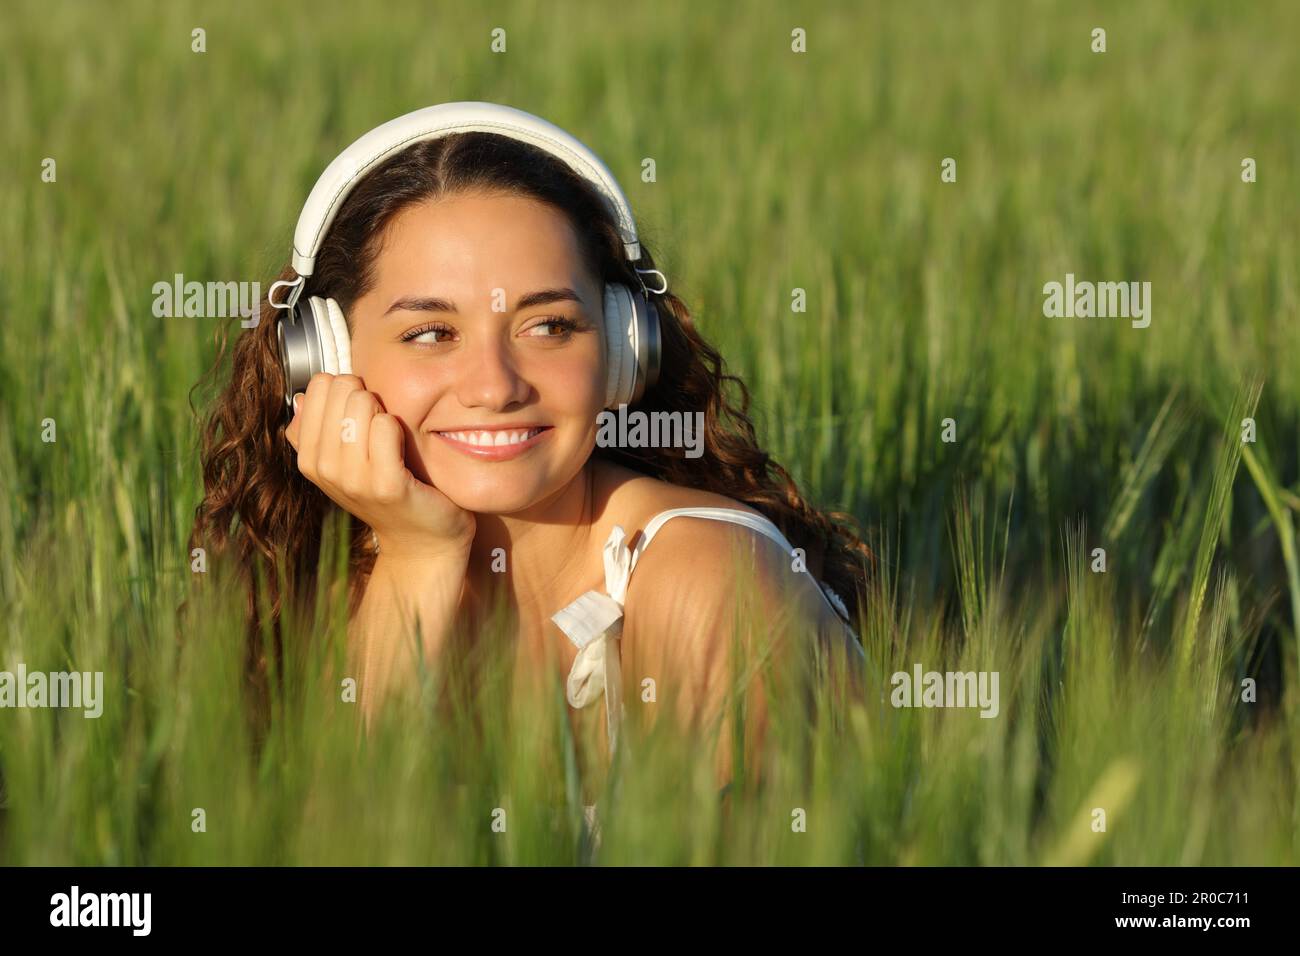 Happy woman listening to music in a green field looking at side Stock Photo